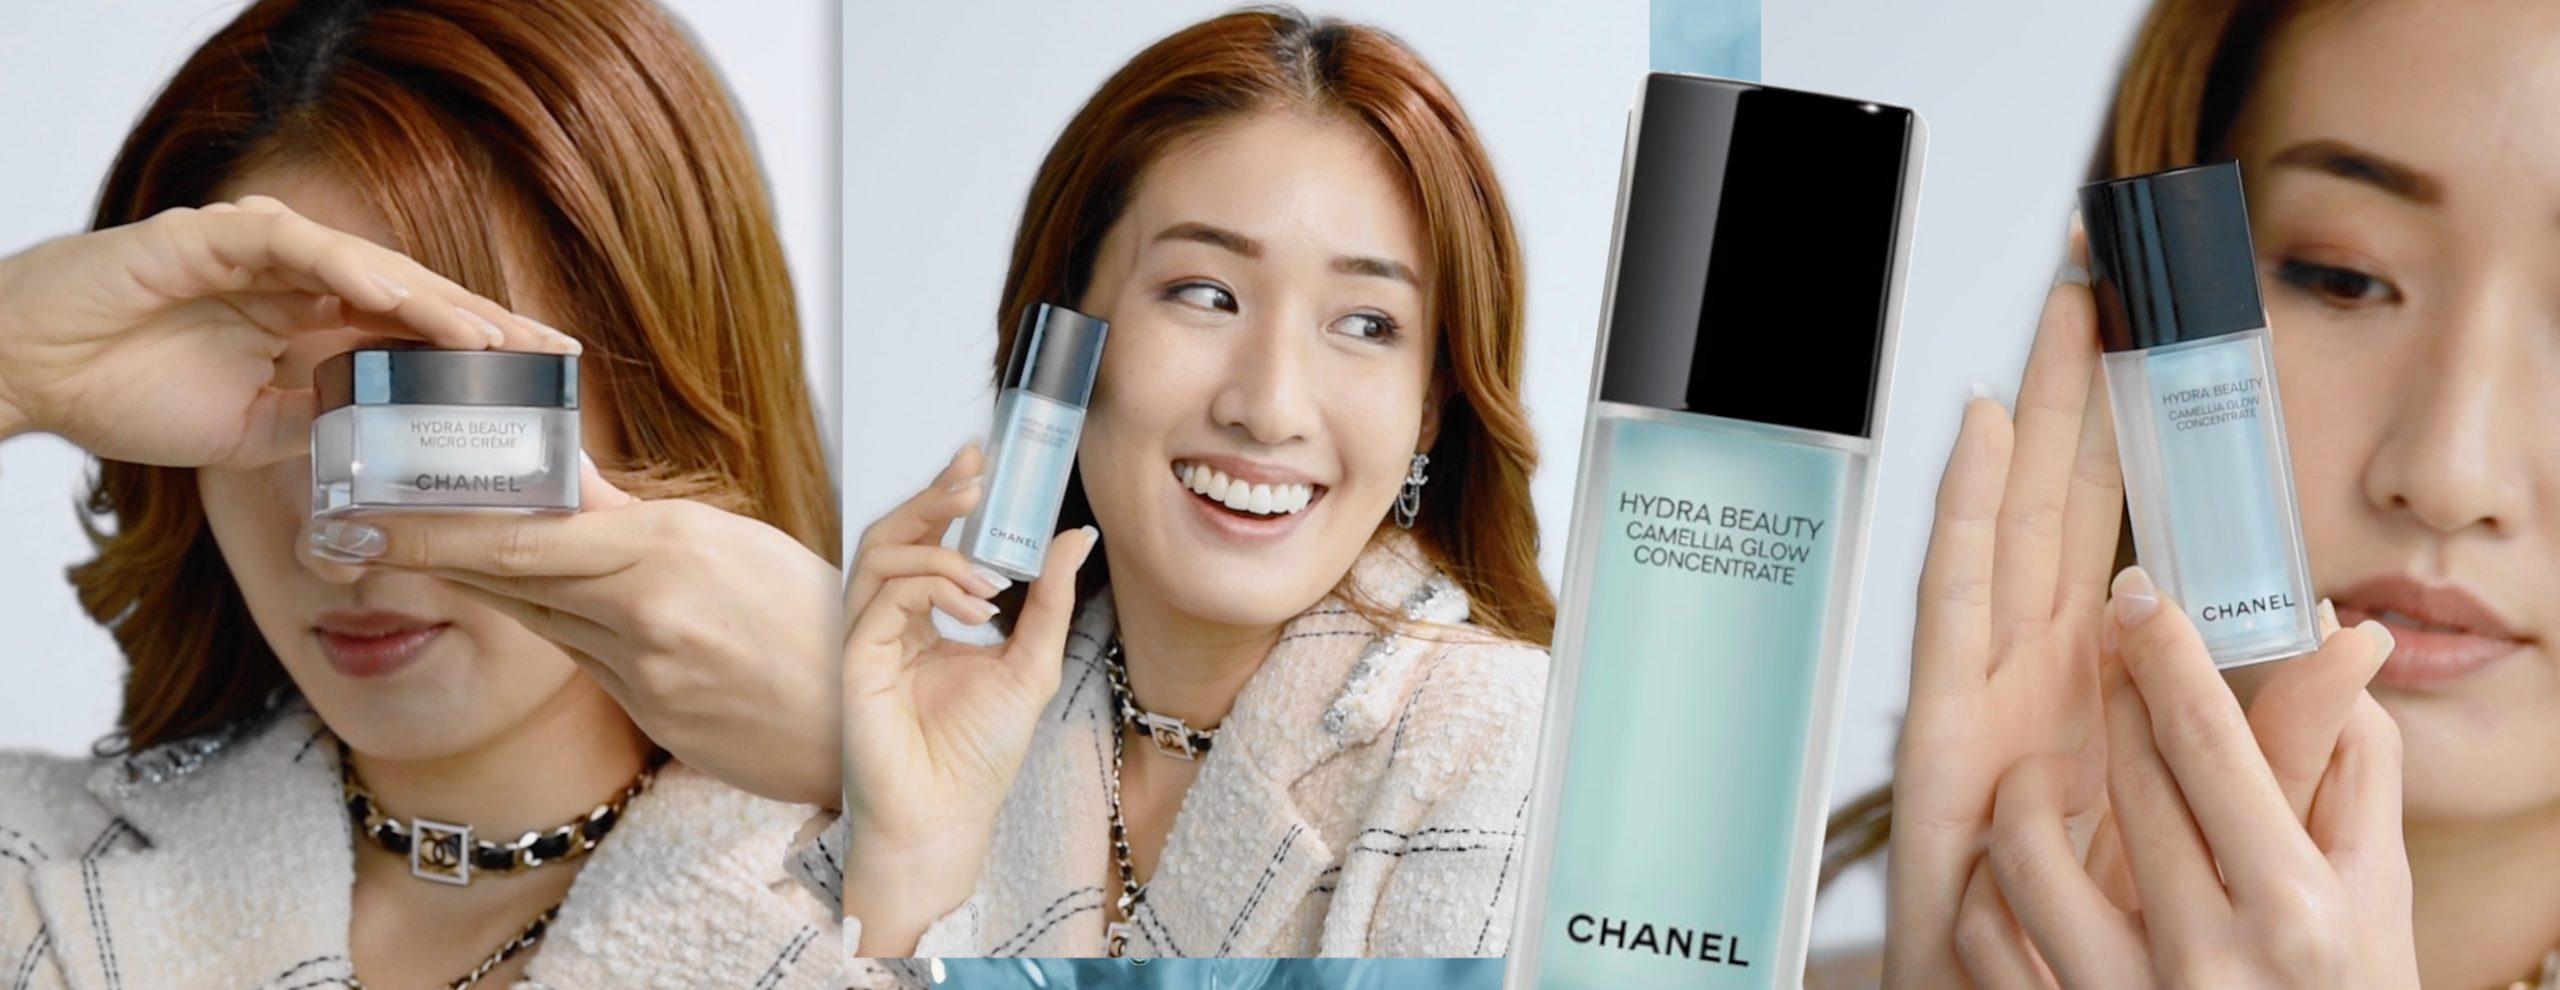 CHANEL's Hydra Beauty Skincare — Kimberly Wang's Go-To Range For Hydrated,  Radiant Skin